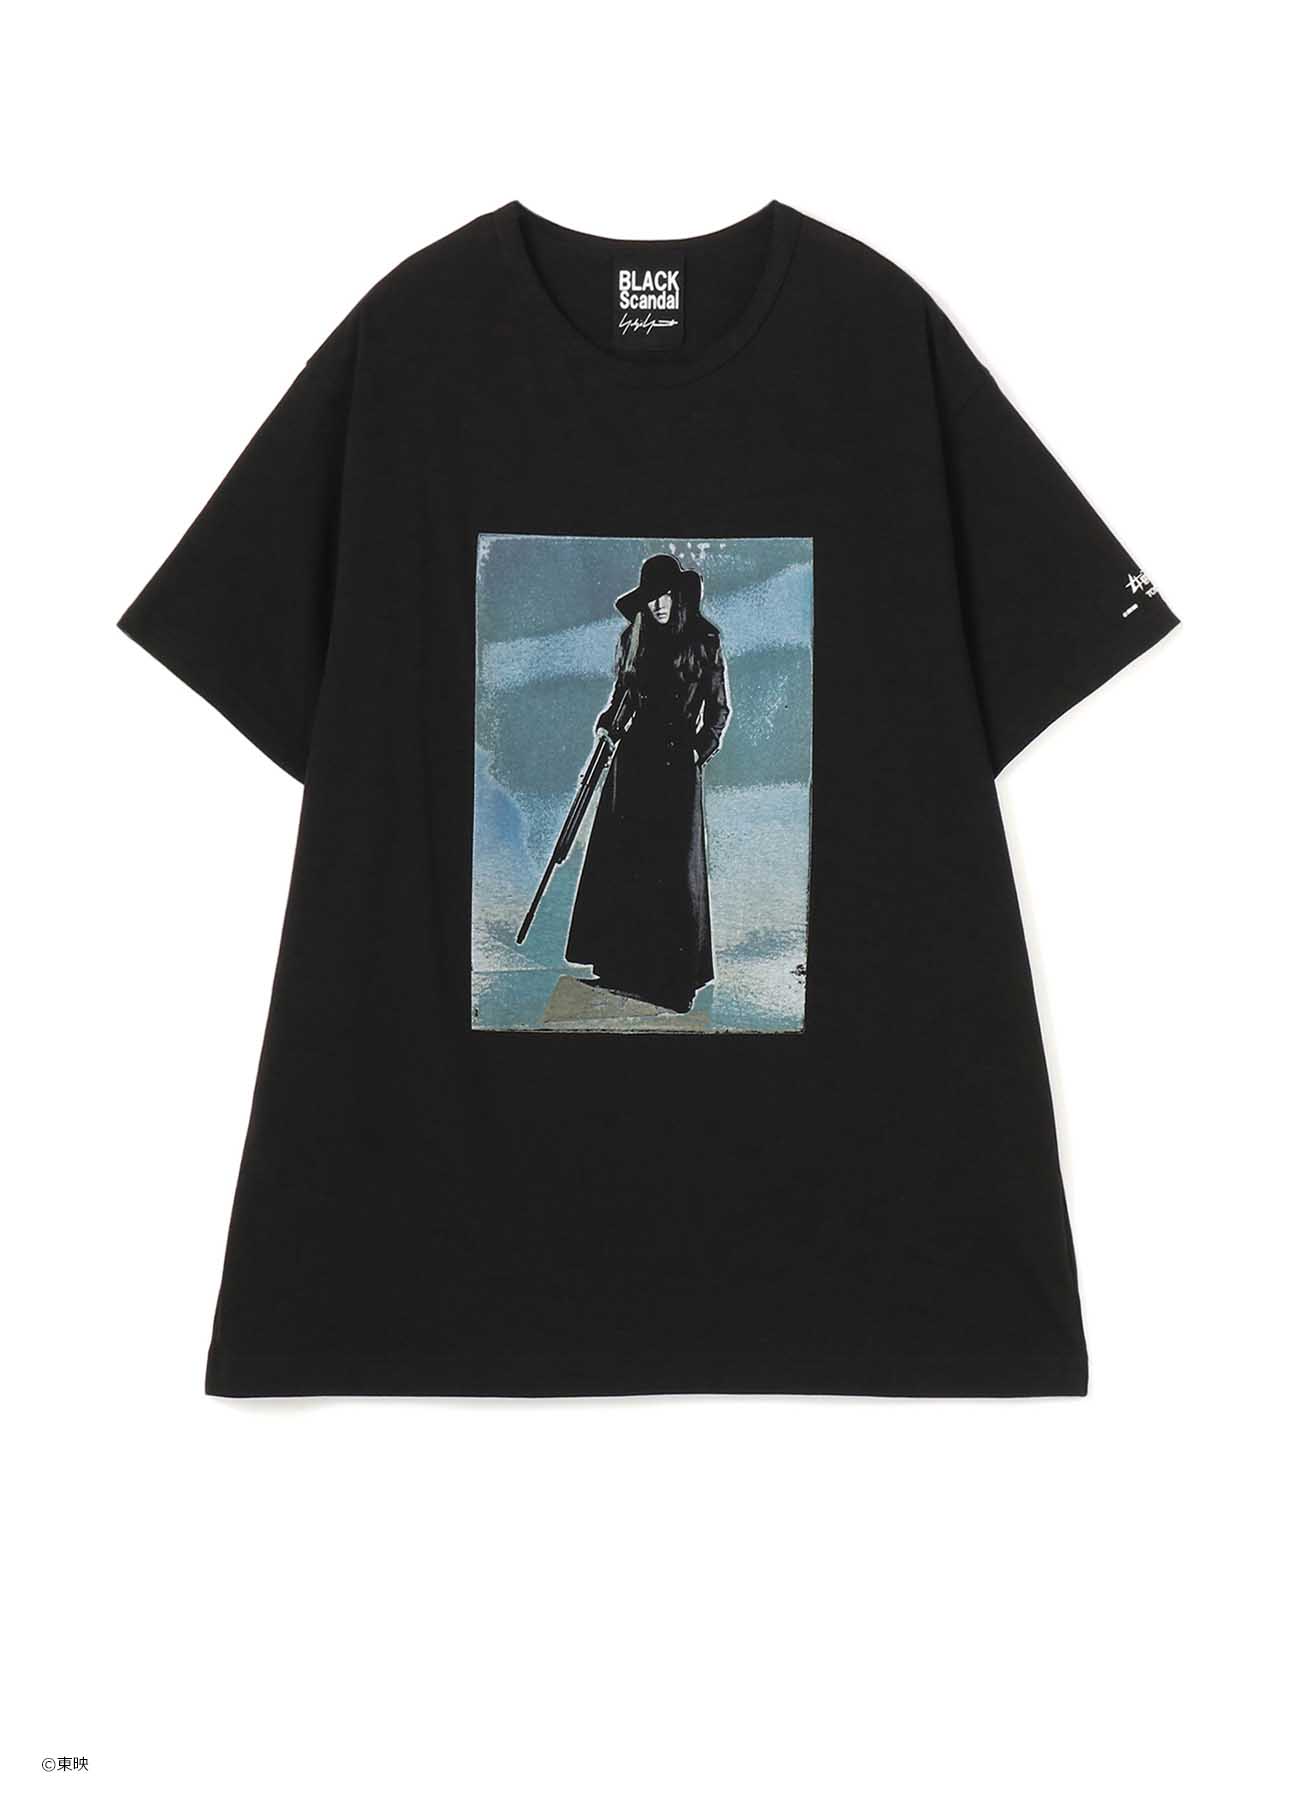 【5/24 10:00(JST) Release】FEMALE CONVICT: 701 SCORPION GRUDGE SONG SHORT SLEEVES CUT SEWN